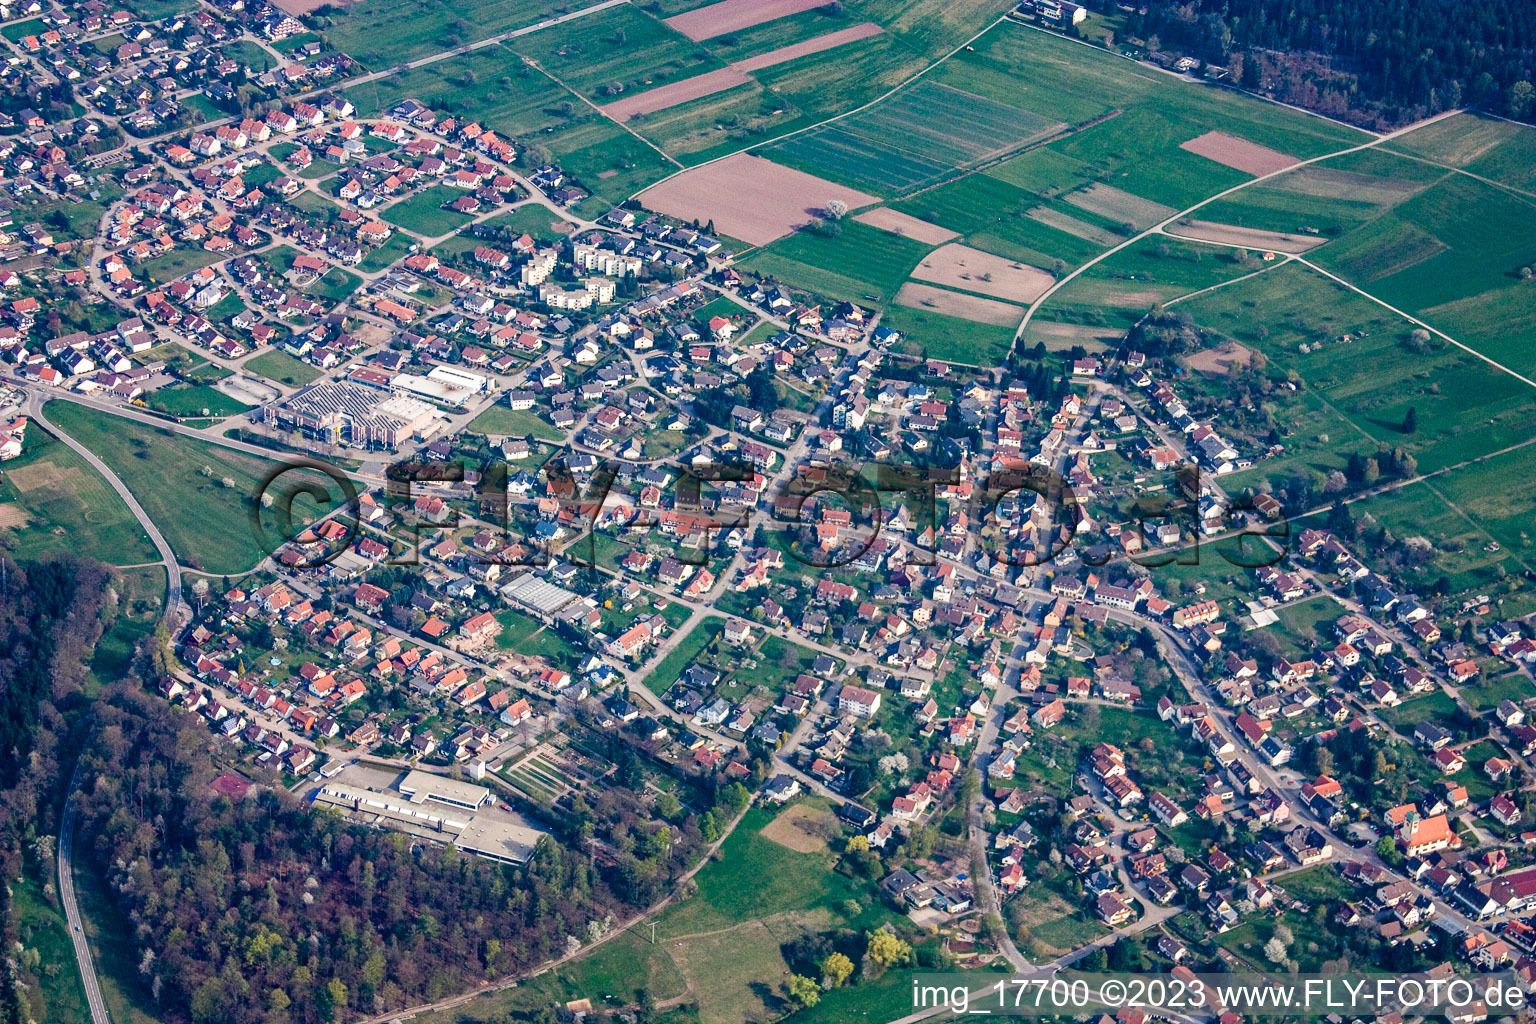 District Conweiler in Straubenhardt in the state Baden-Wuerttemberg, Germany from above